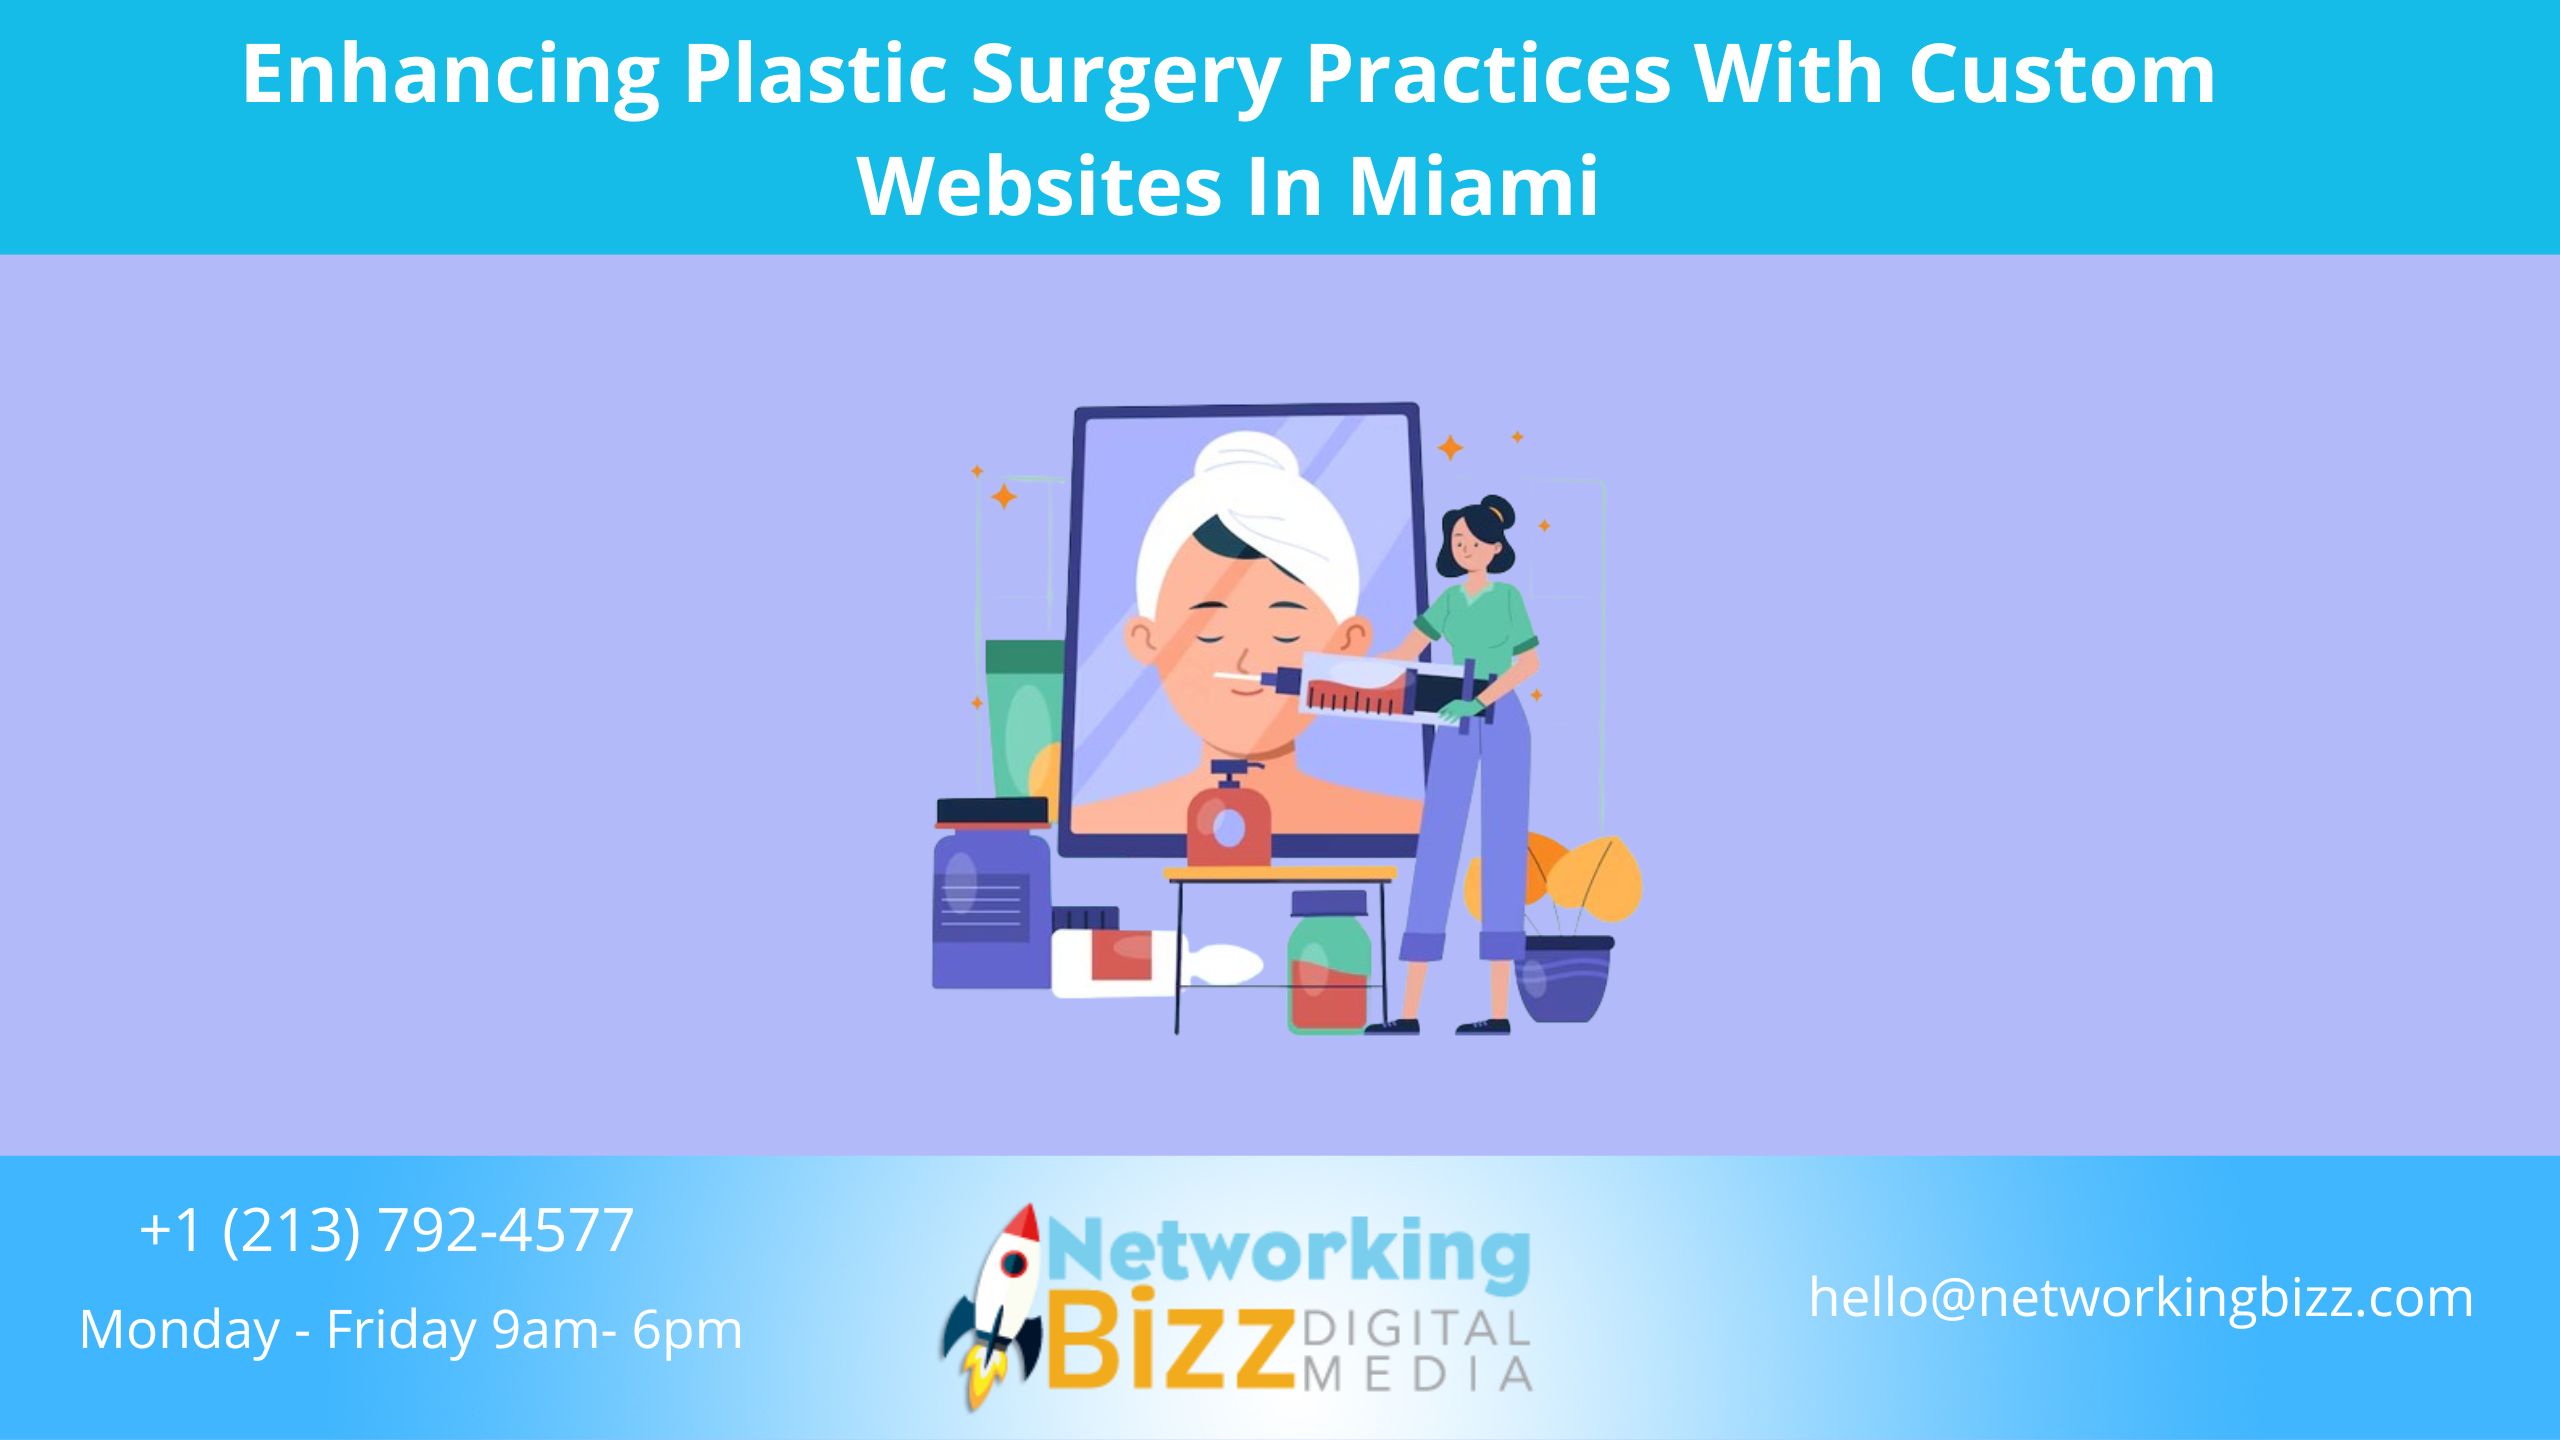 Enhancing Plastic Surgery Practices With Custom Websites In Miami